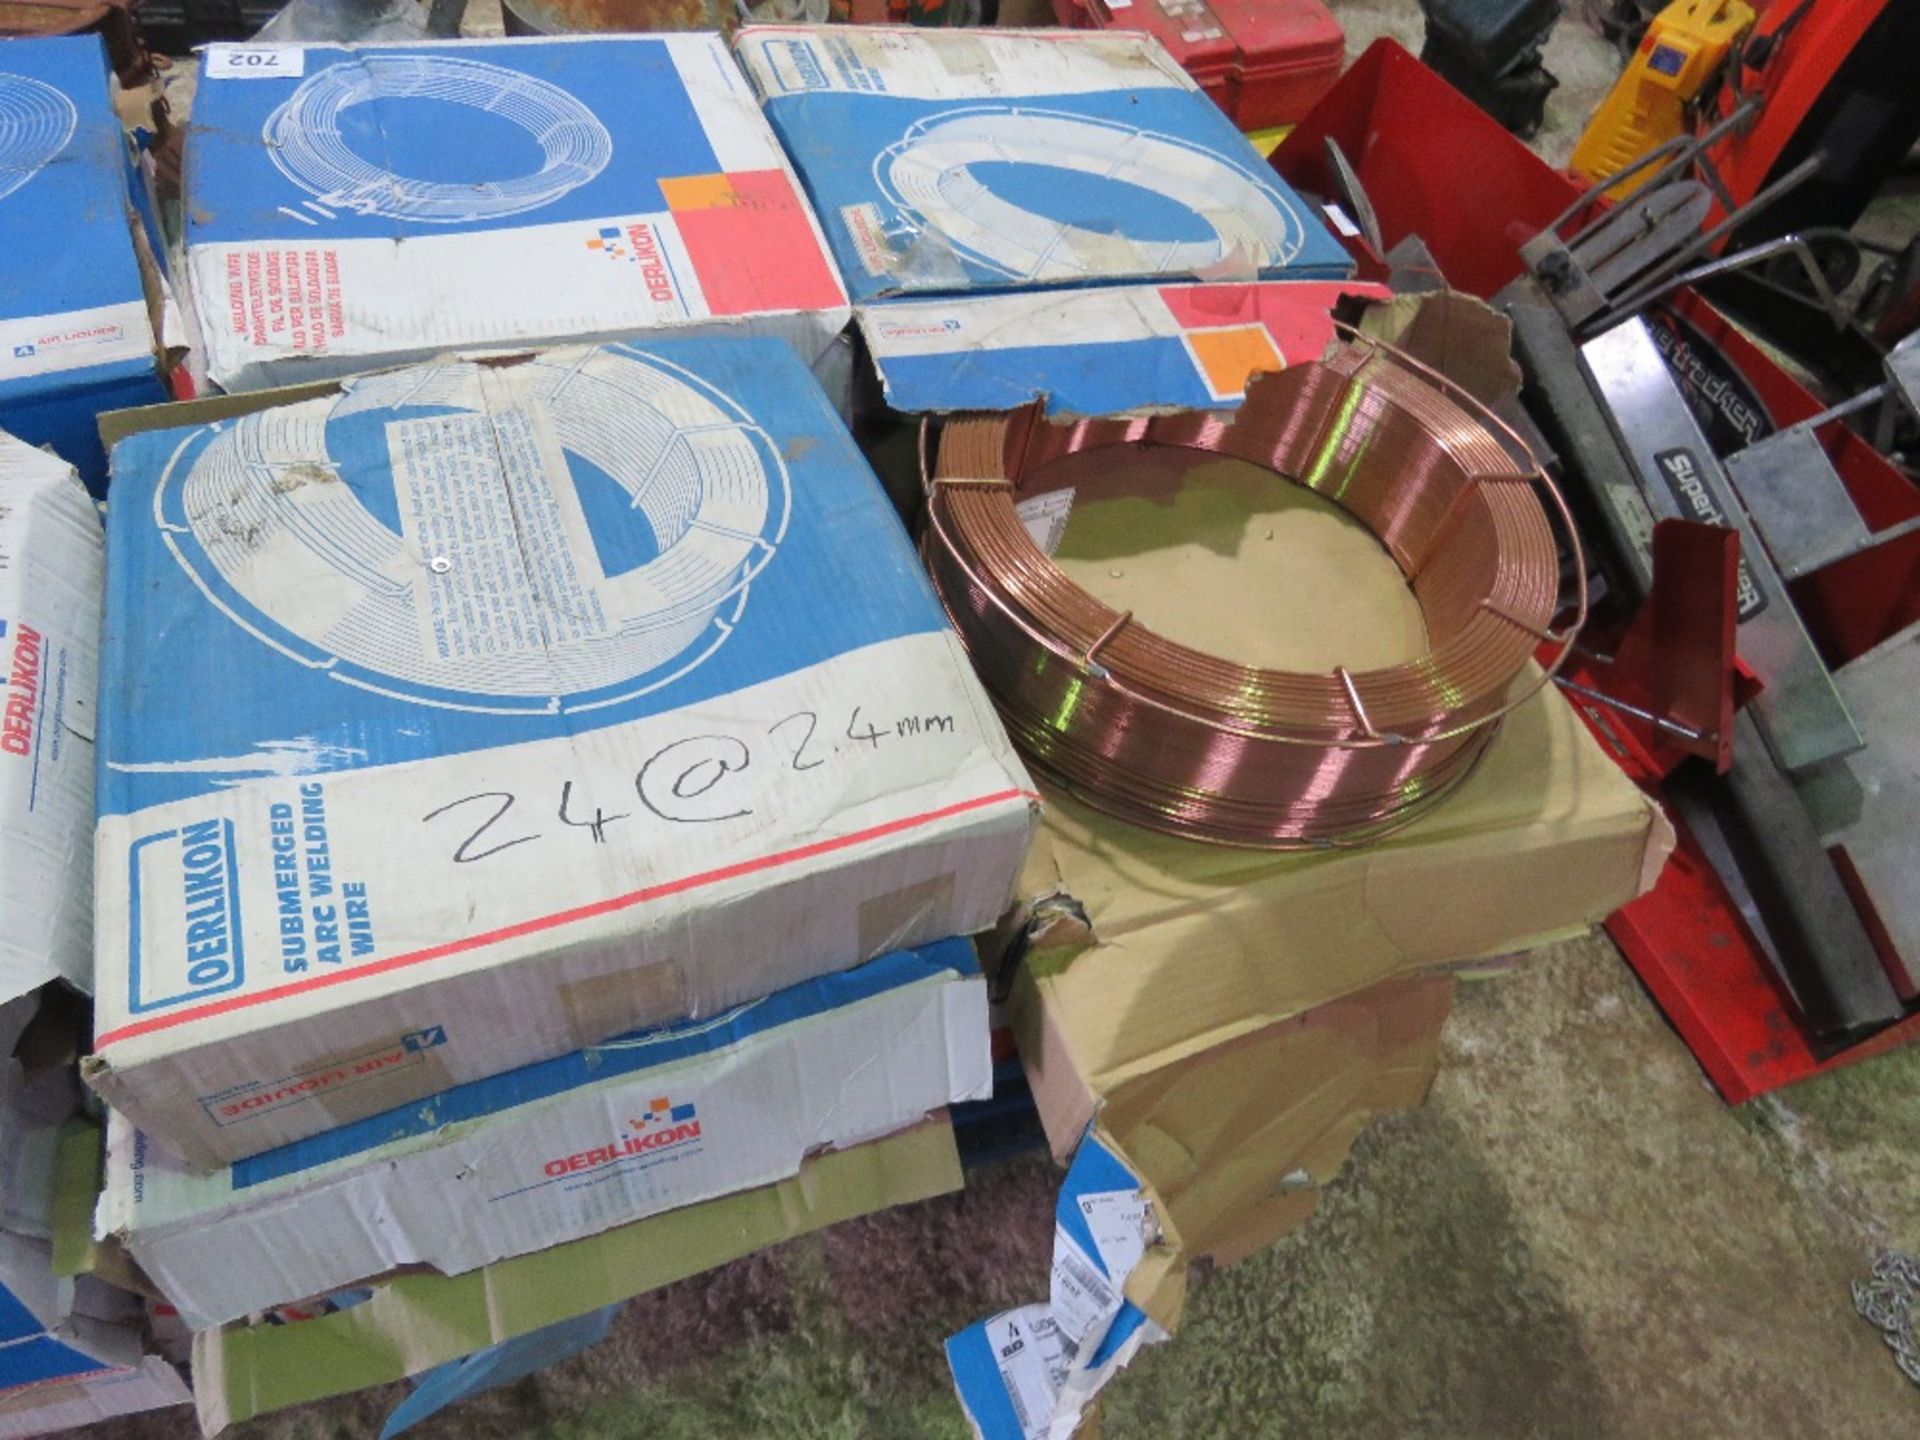 24NO ROLLS OF MIG WELDING WIRE, 2.4MM GUAGE. MAINLY OERLIKON BRAND. SOURCED FROM WORKSHOP CLOSURE. - Image 2 of 4